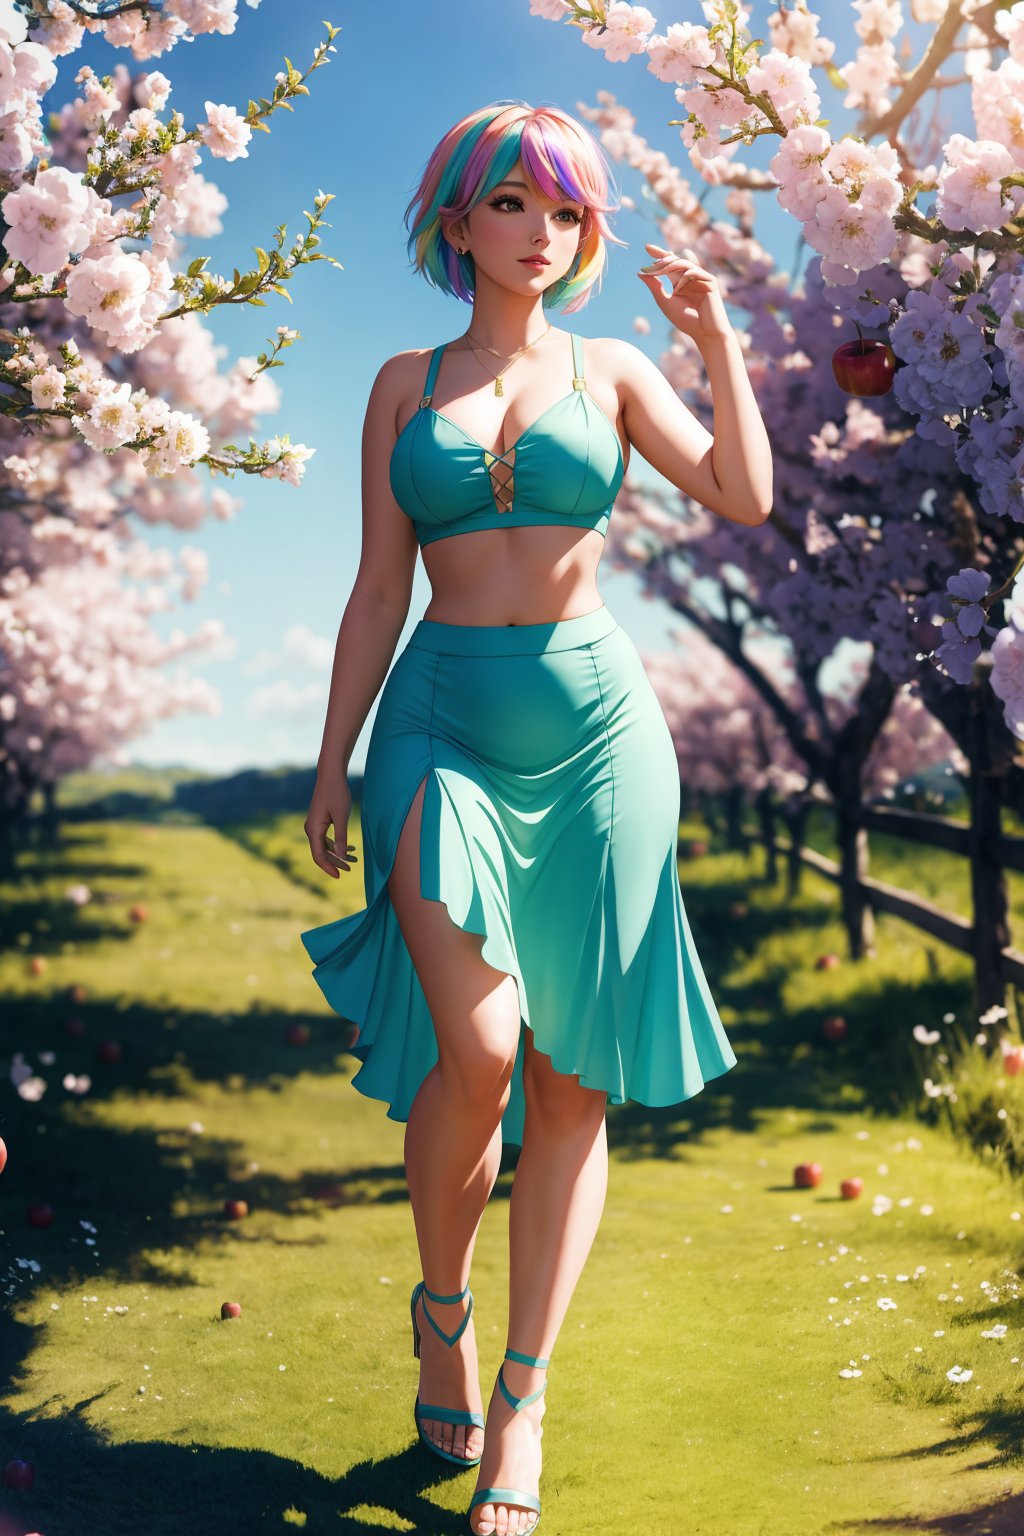 masterpiece of photorealism, photorealistic highly detailed professional 8k raw photography, best hyperrealistic quality, volumetric real-time lighting and shadows, Two-Shot (Two People in the Frame) Photography, Mermaid or Oceanic Fantasy, Curvy: Generous curves in the bust, waist, and hips, creating a voluptuous silhouette,  **Fitted Midi Skirt, Crop Top, and Strappy Heels**, Pastel Rainbow Pixie Cut, Kicking Pose: Playfully kicking one leg forward while maintaining balance., Countryside Apple Orchards in Bloom full of busy people